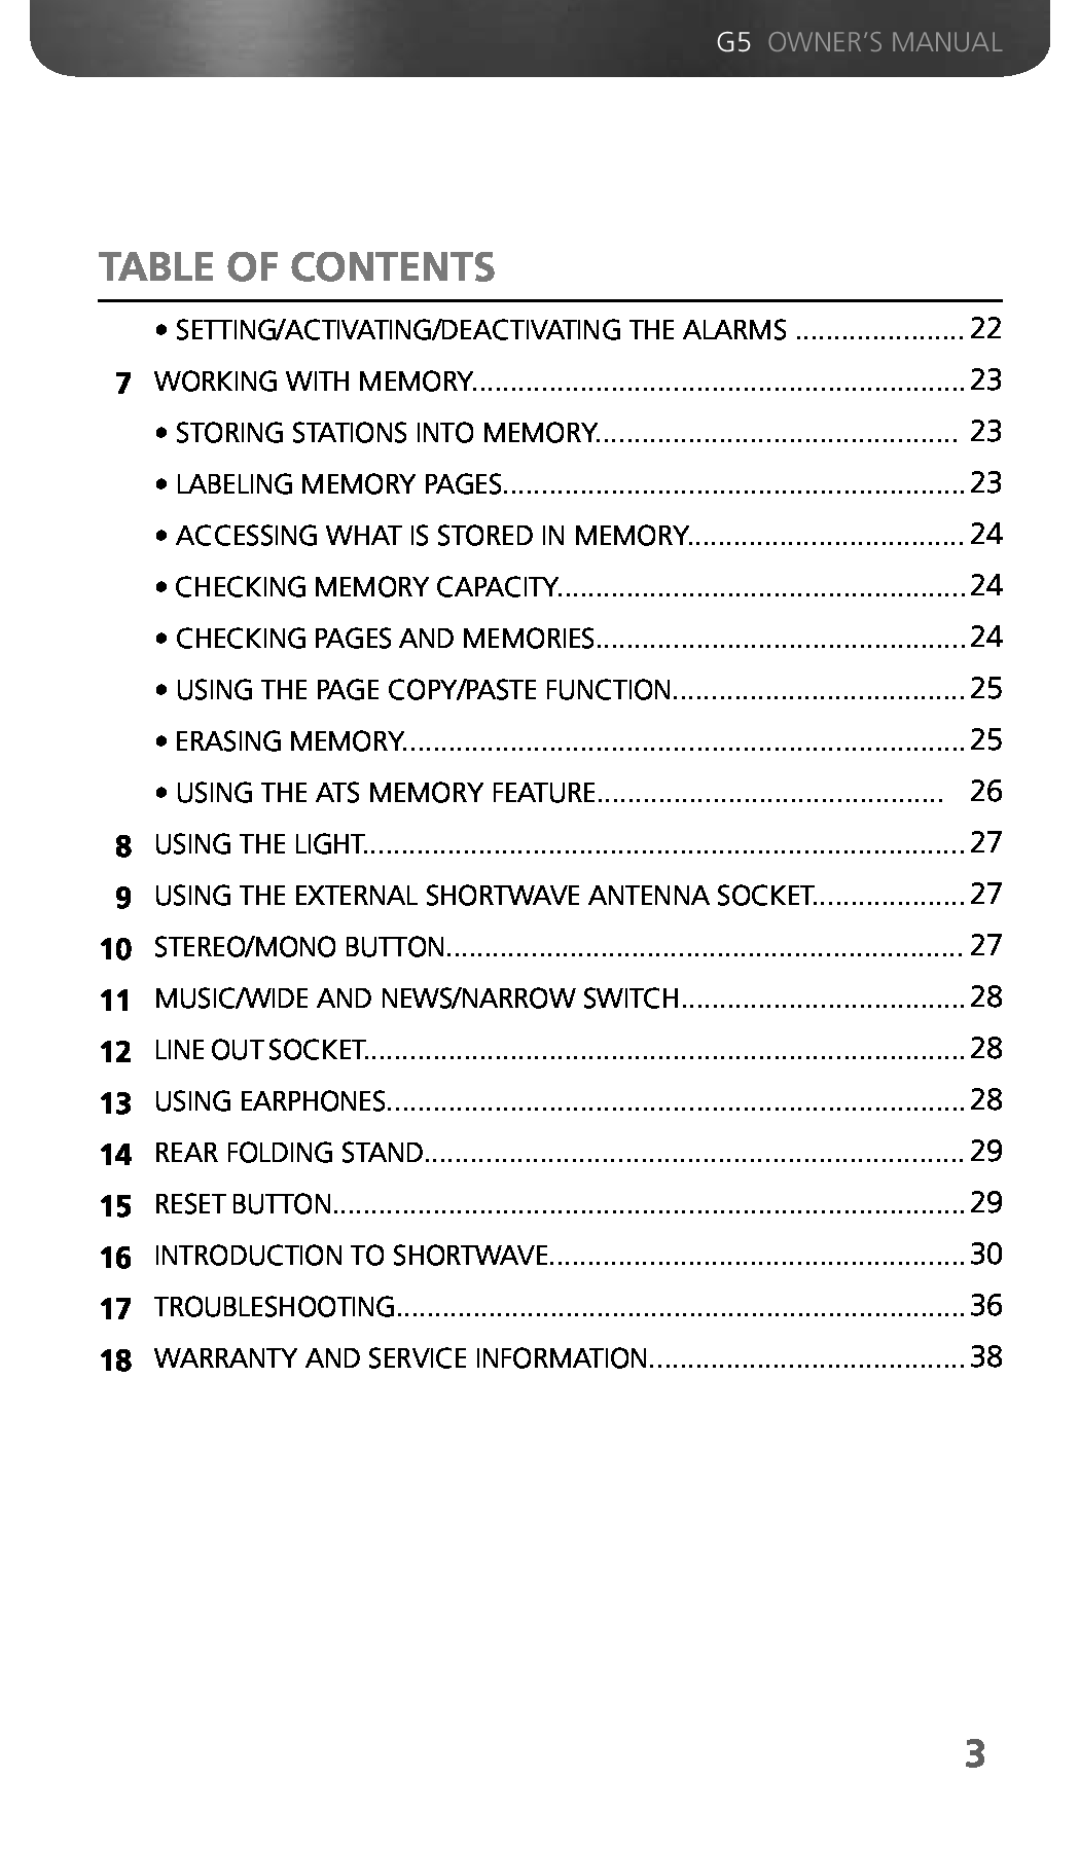 Eton G5 owner manual Table Of Contents, Setting/Activating/Deactivating The Alarms 